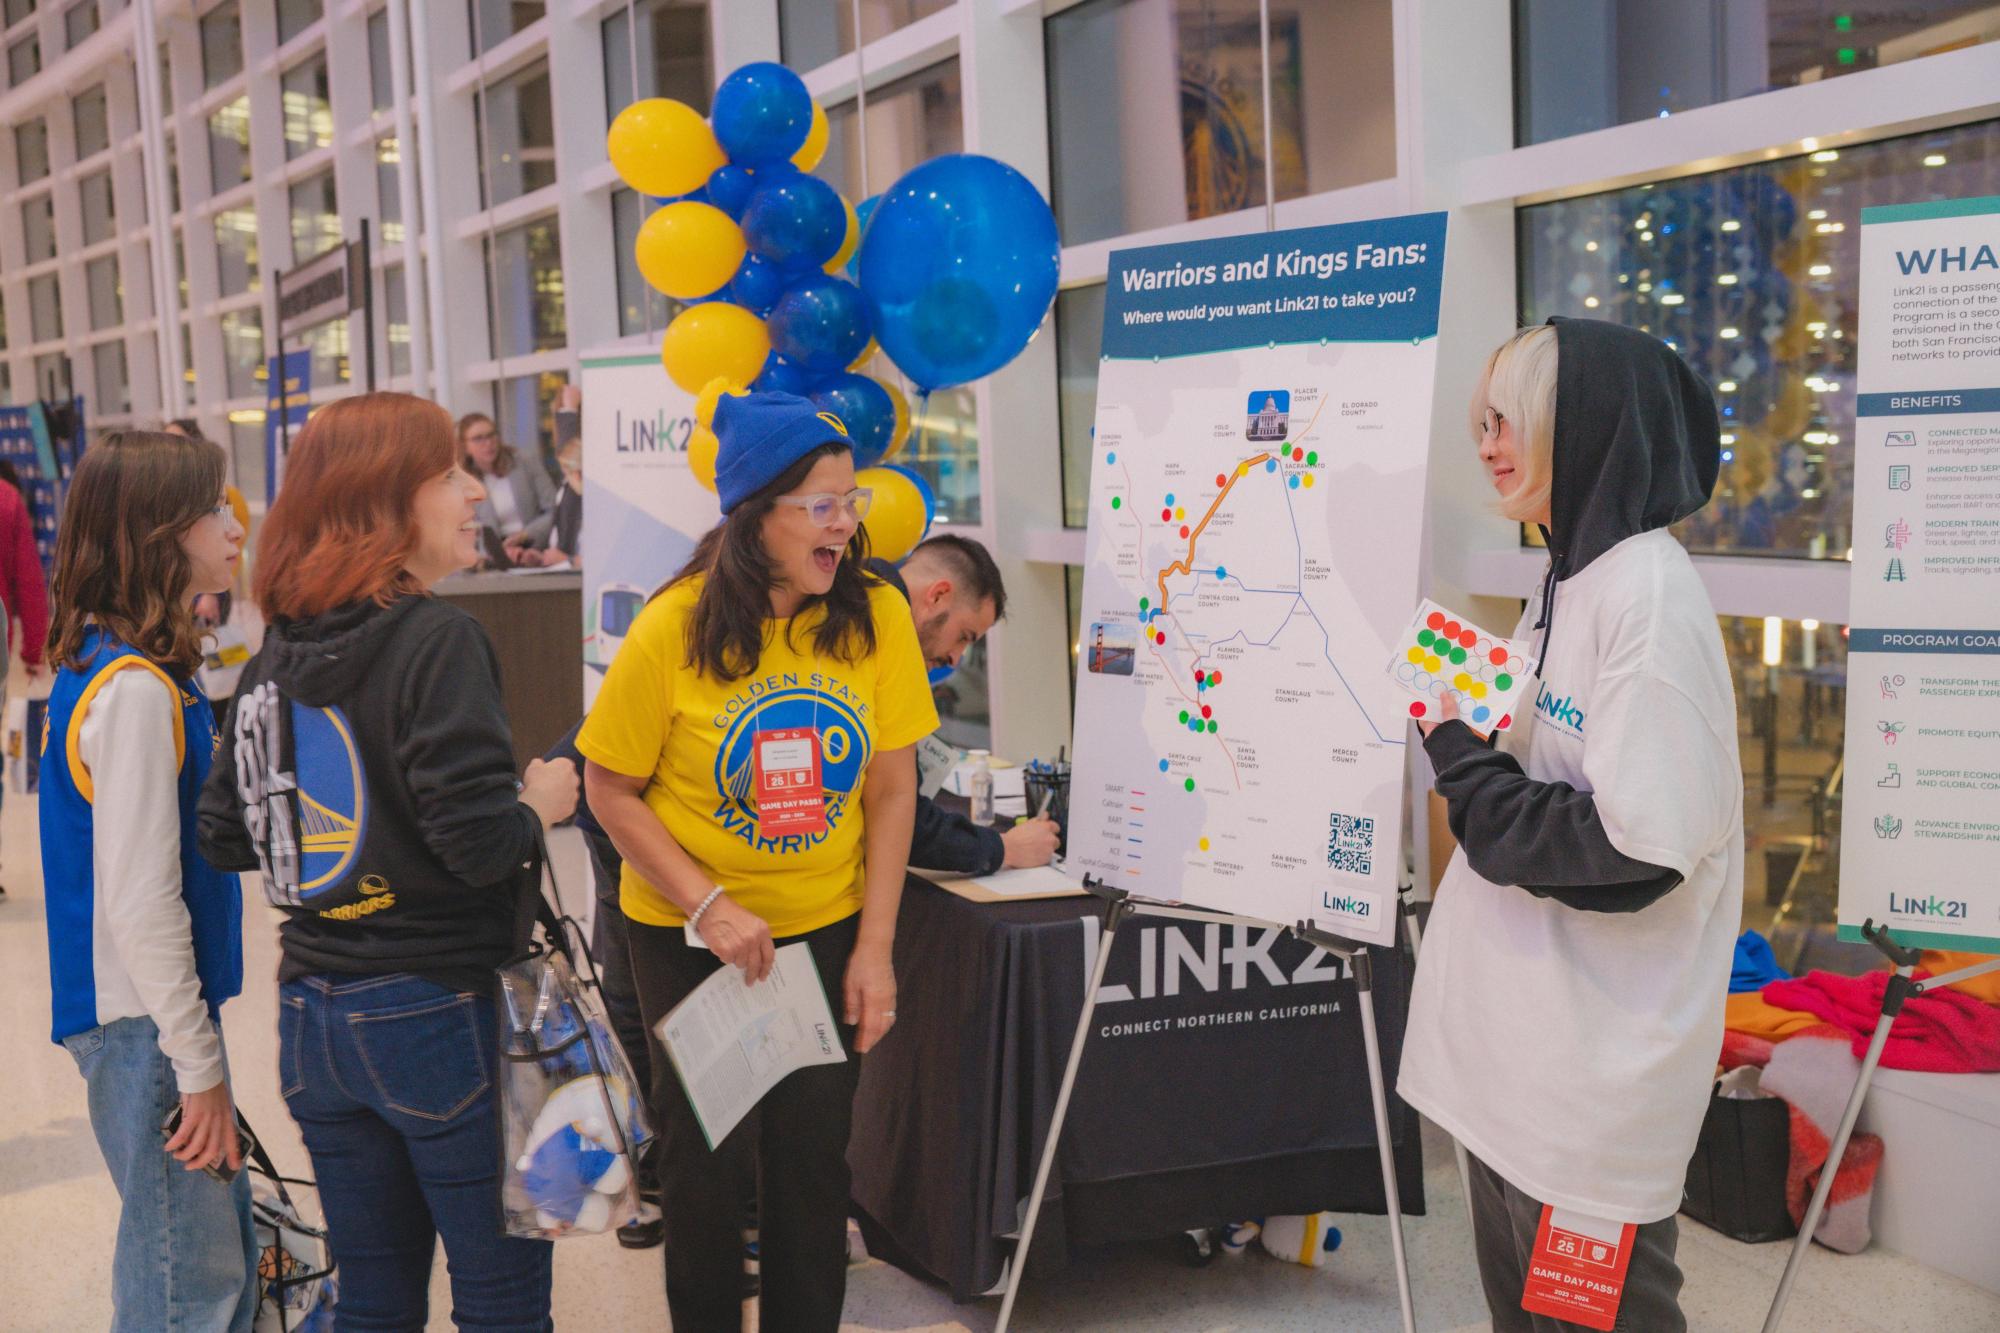 Attendees in Golden State Warriors gear smile in excitement as they interact with staff hosting a Link21 information table.